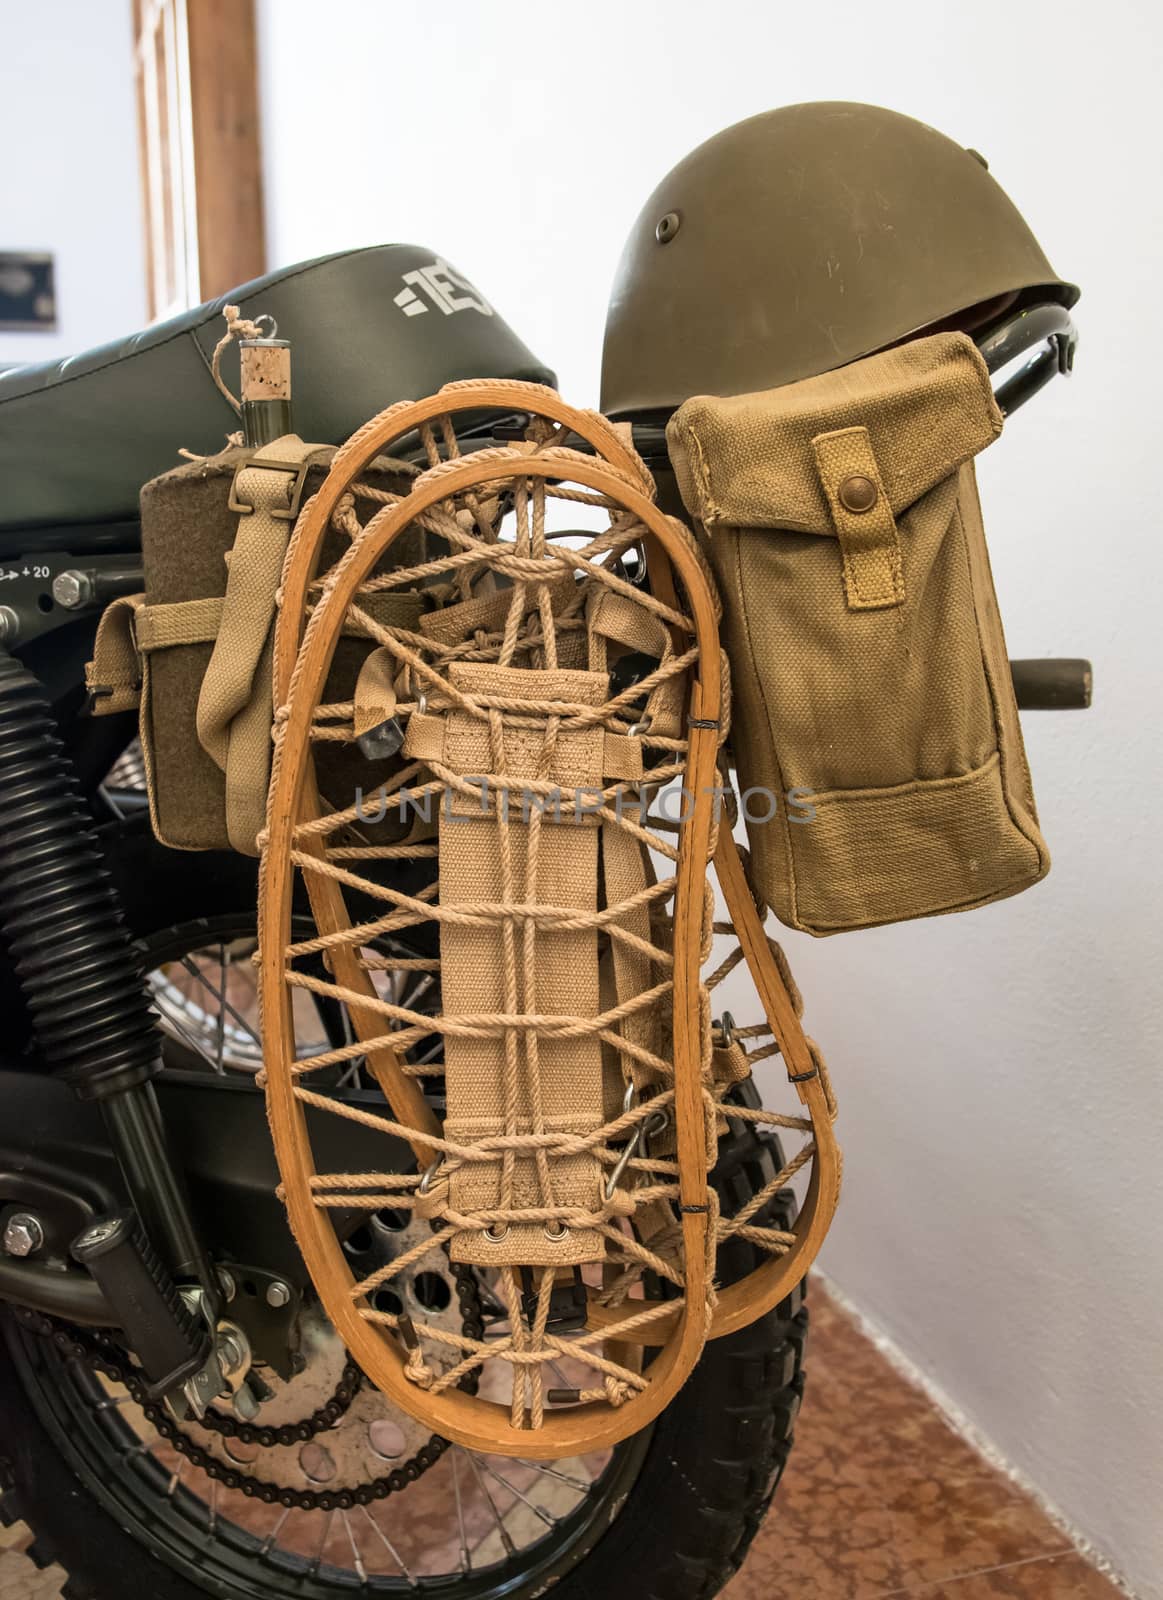 Winter equipment supplied to an old military motorbike.